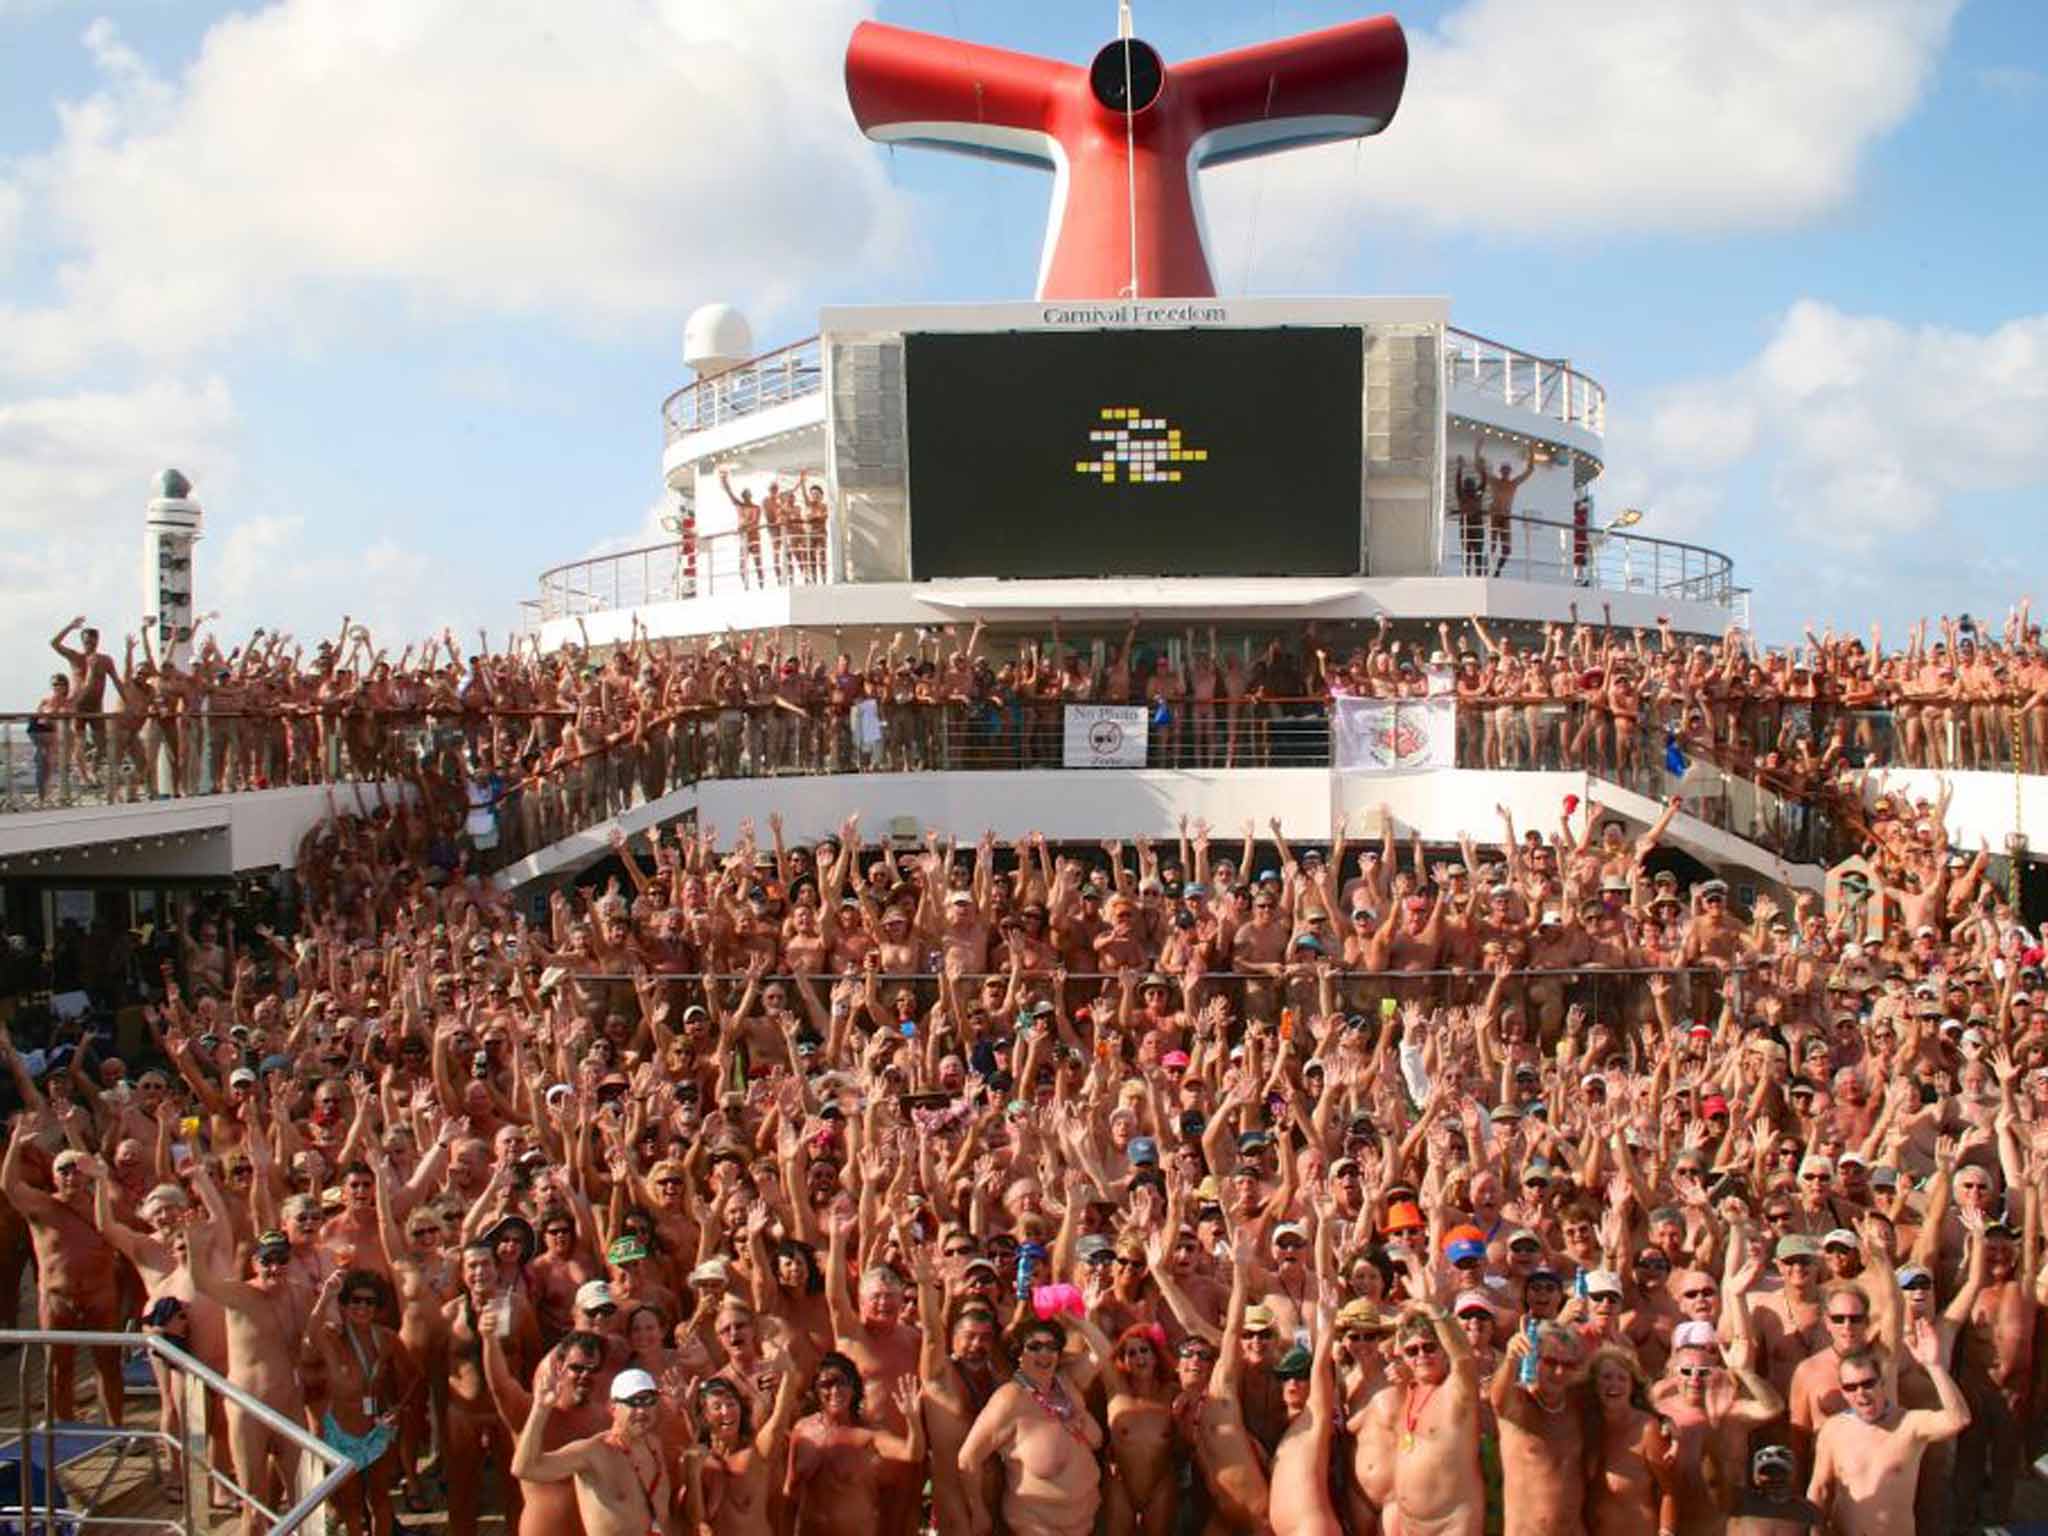 Nudist cruise ship: What's it like on a boat with 2,000 ...